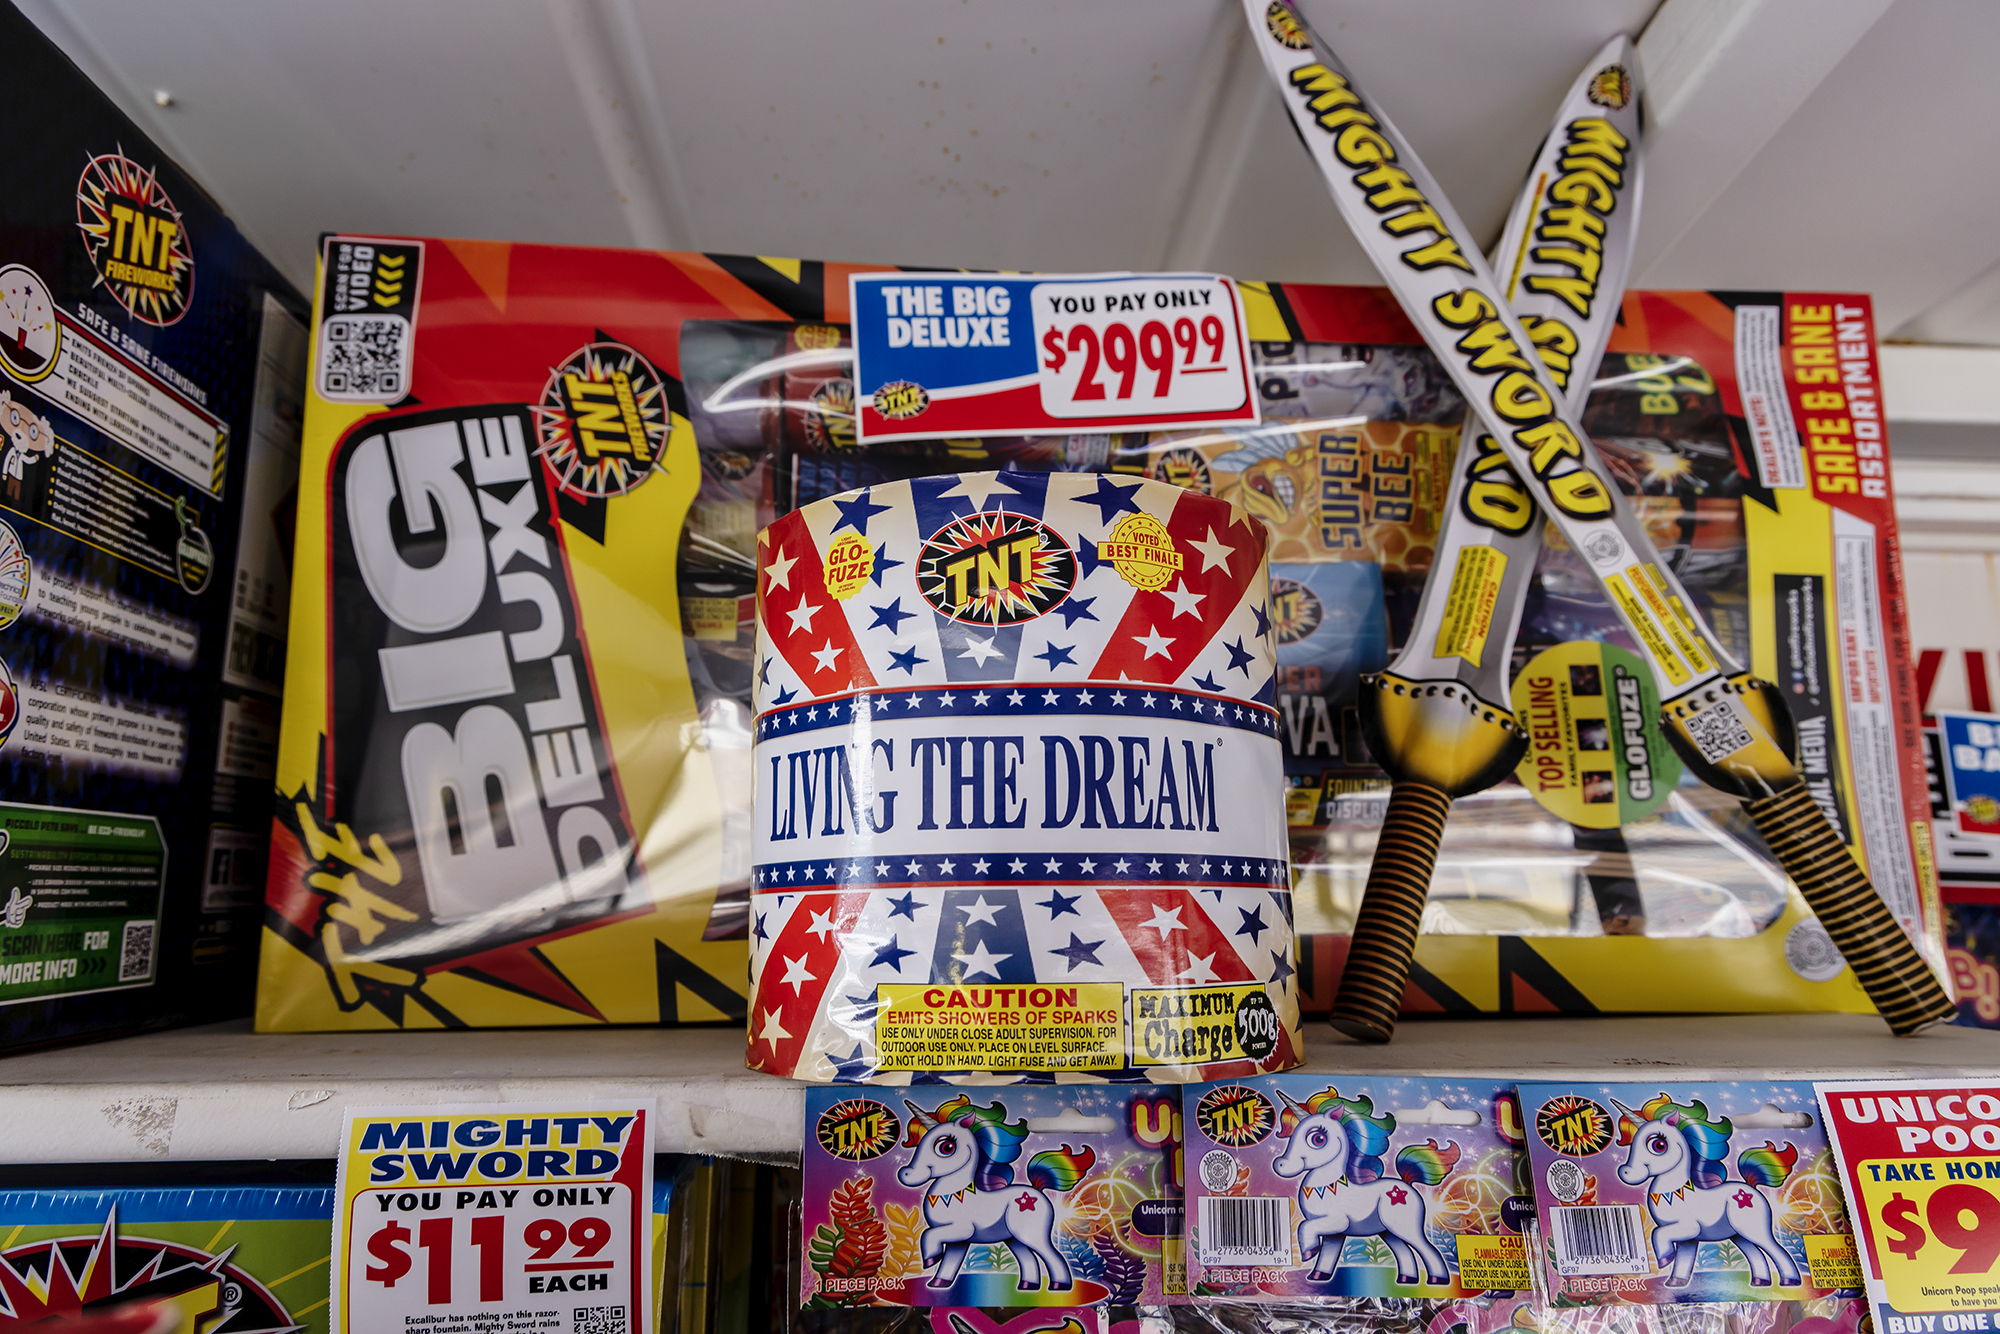 A legal fireworks stand in the city of Vernon sells fireworks that aren't aerial and don't explode, on July 2, 2024. The stand is operated by the Rotary club in Vernon. Photo by Ted Soqui for CalMatters